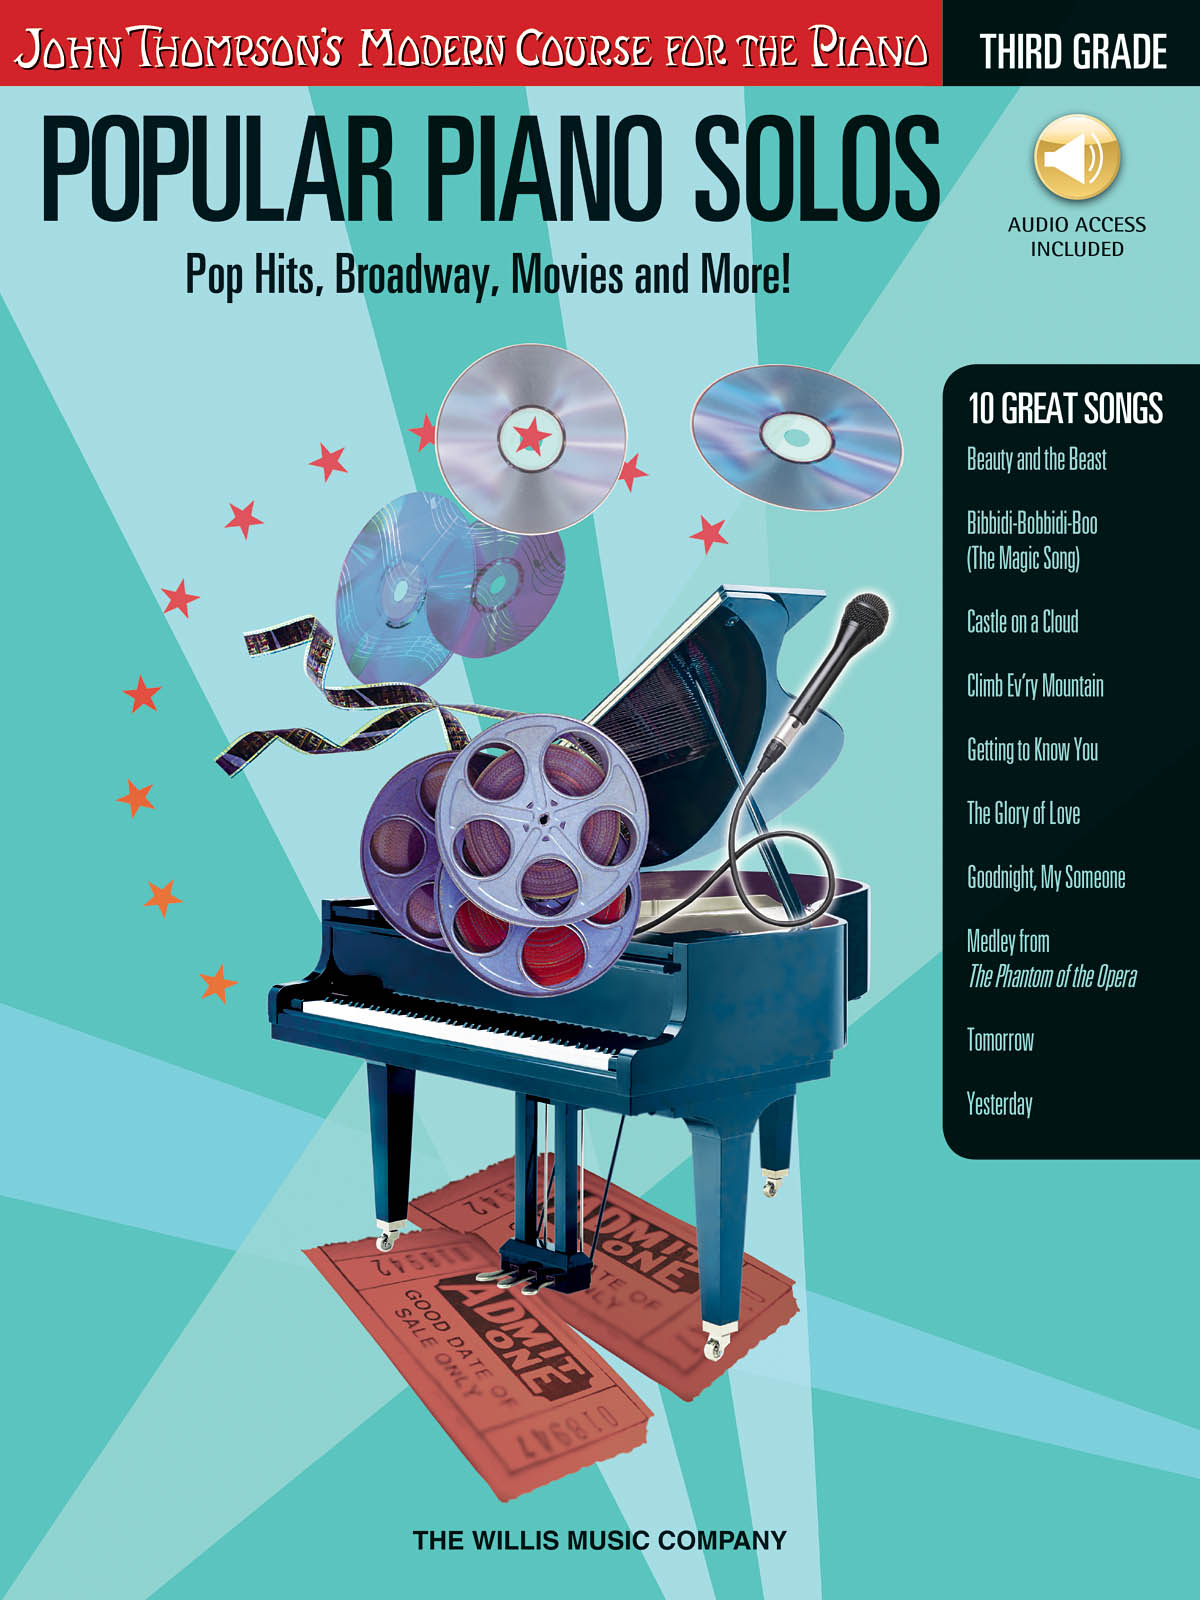 3rd Grade - Pop Hits, Broadway, Movies And More! - Popular Piano Solos